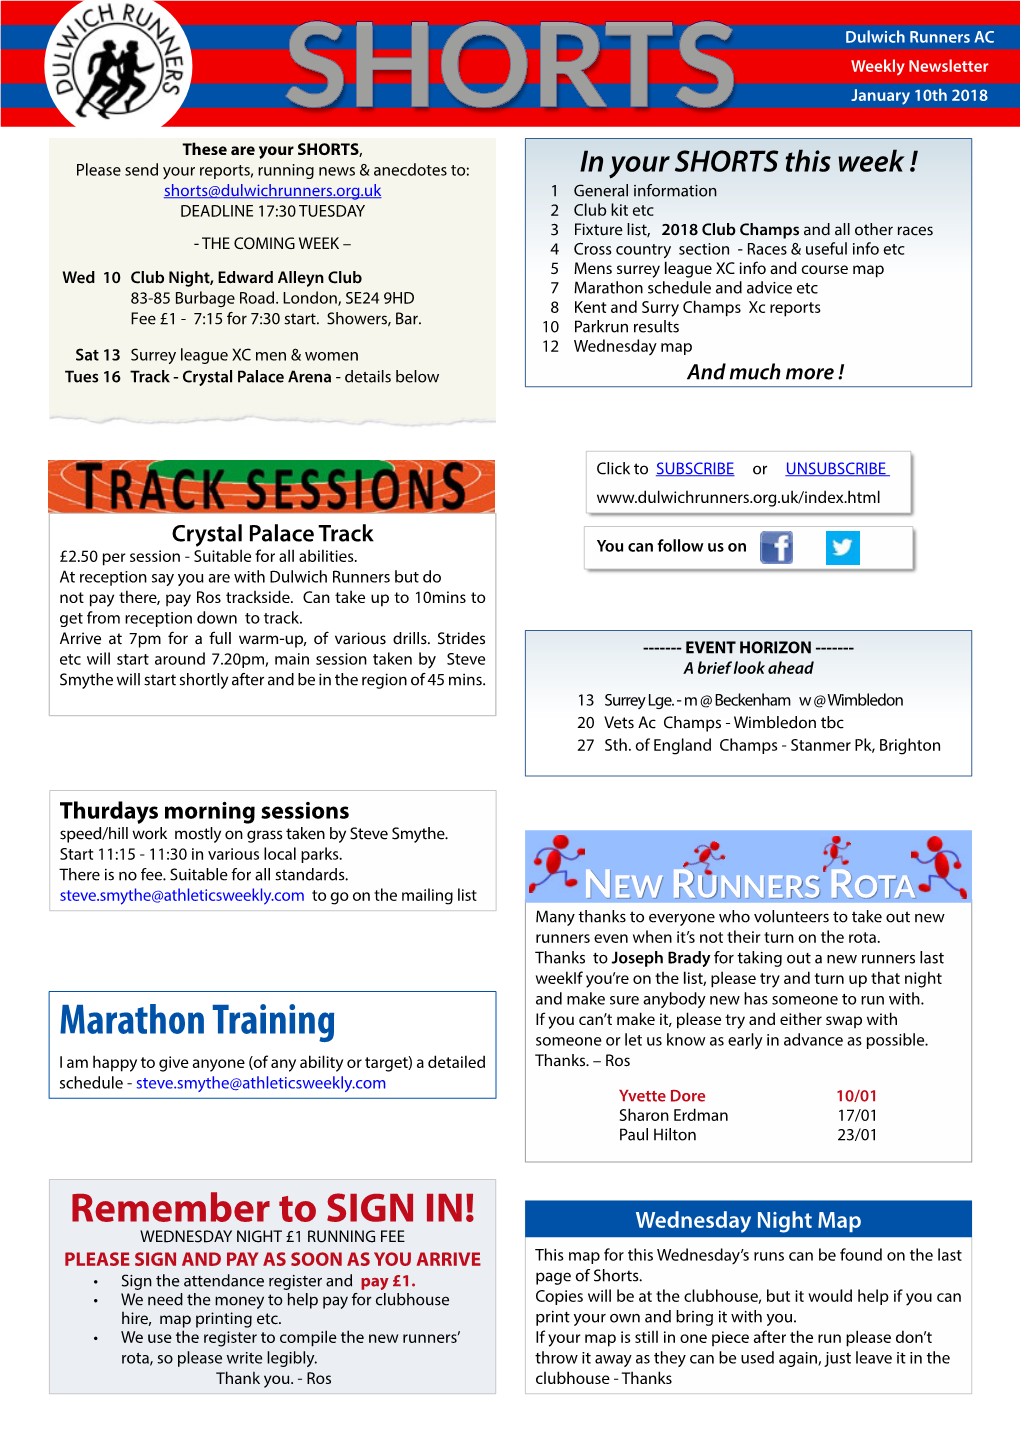 Marathon Training Someone Or Let Us Know As Early in Advance As Possible